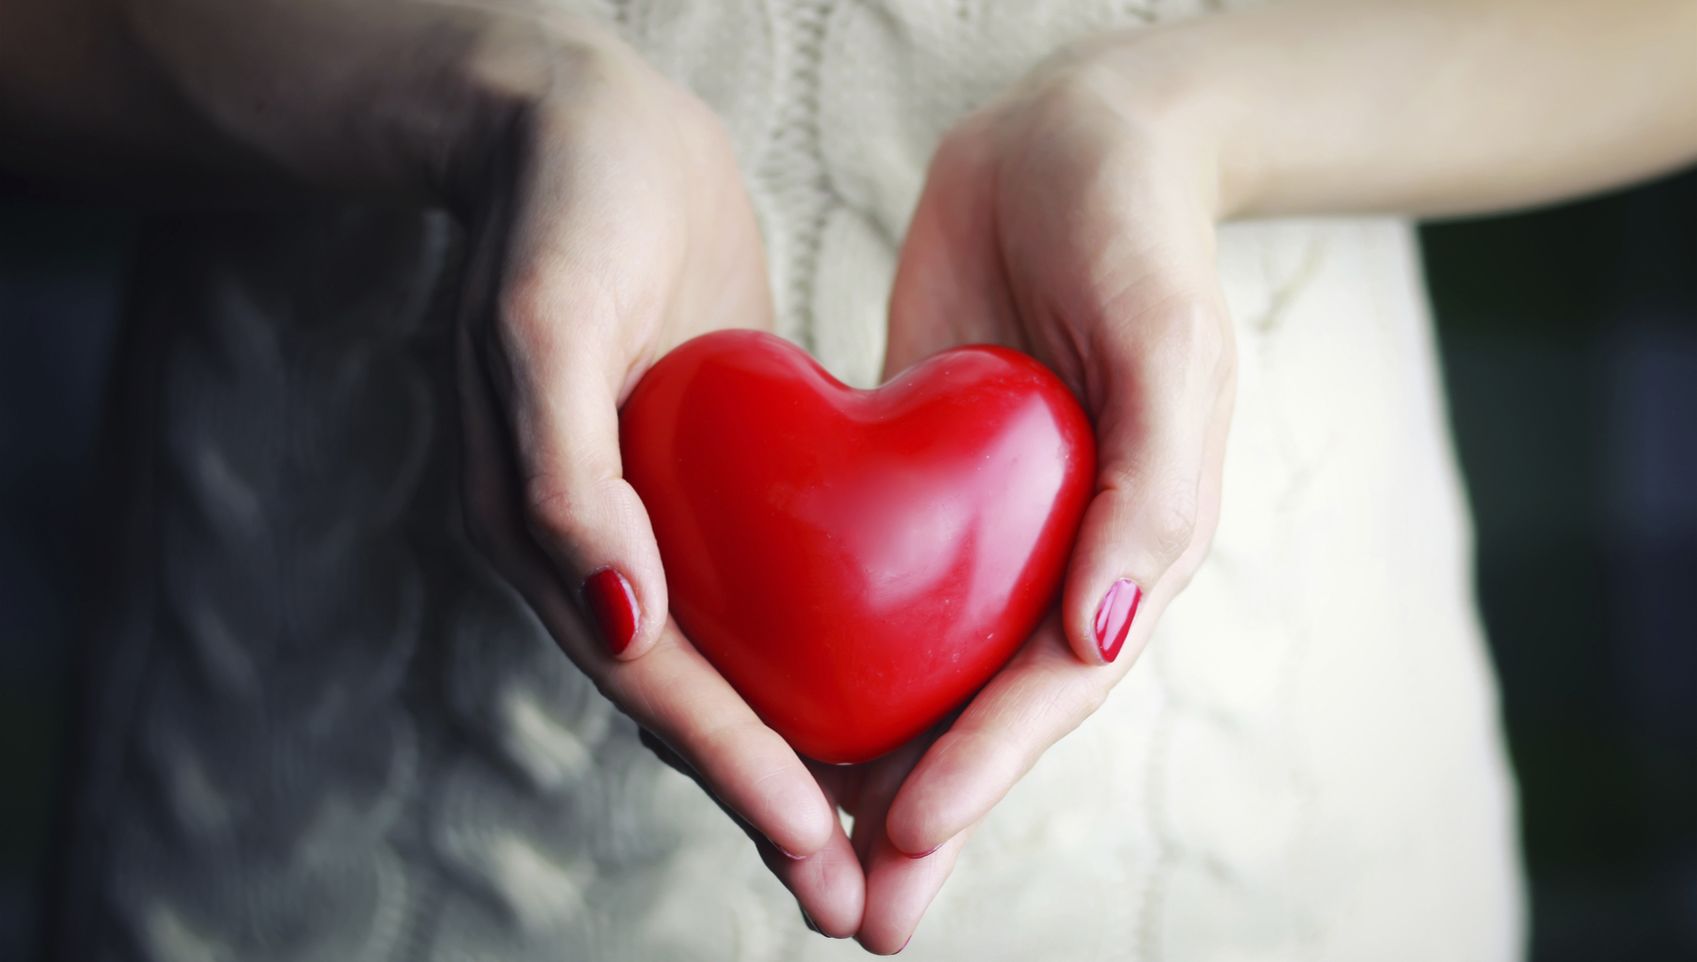 6 Unexpected Effects of Heart Disease